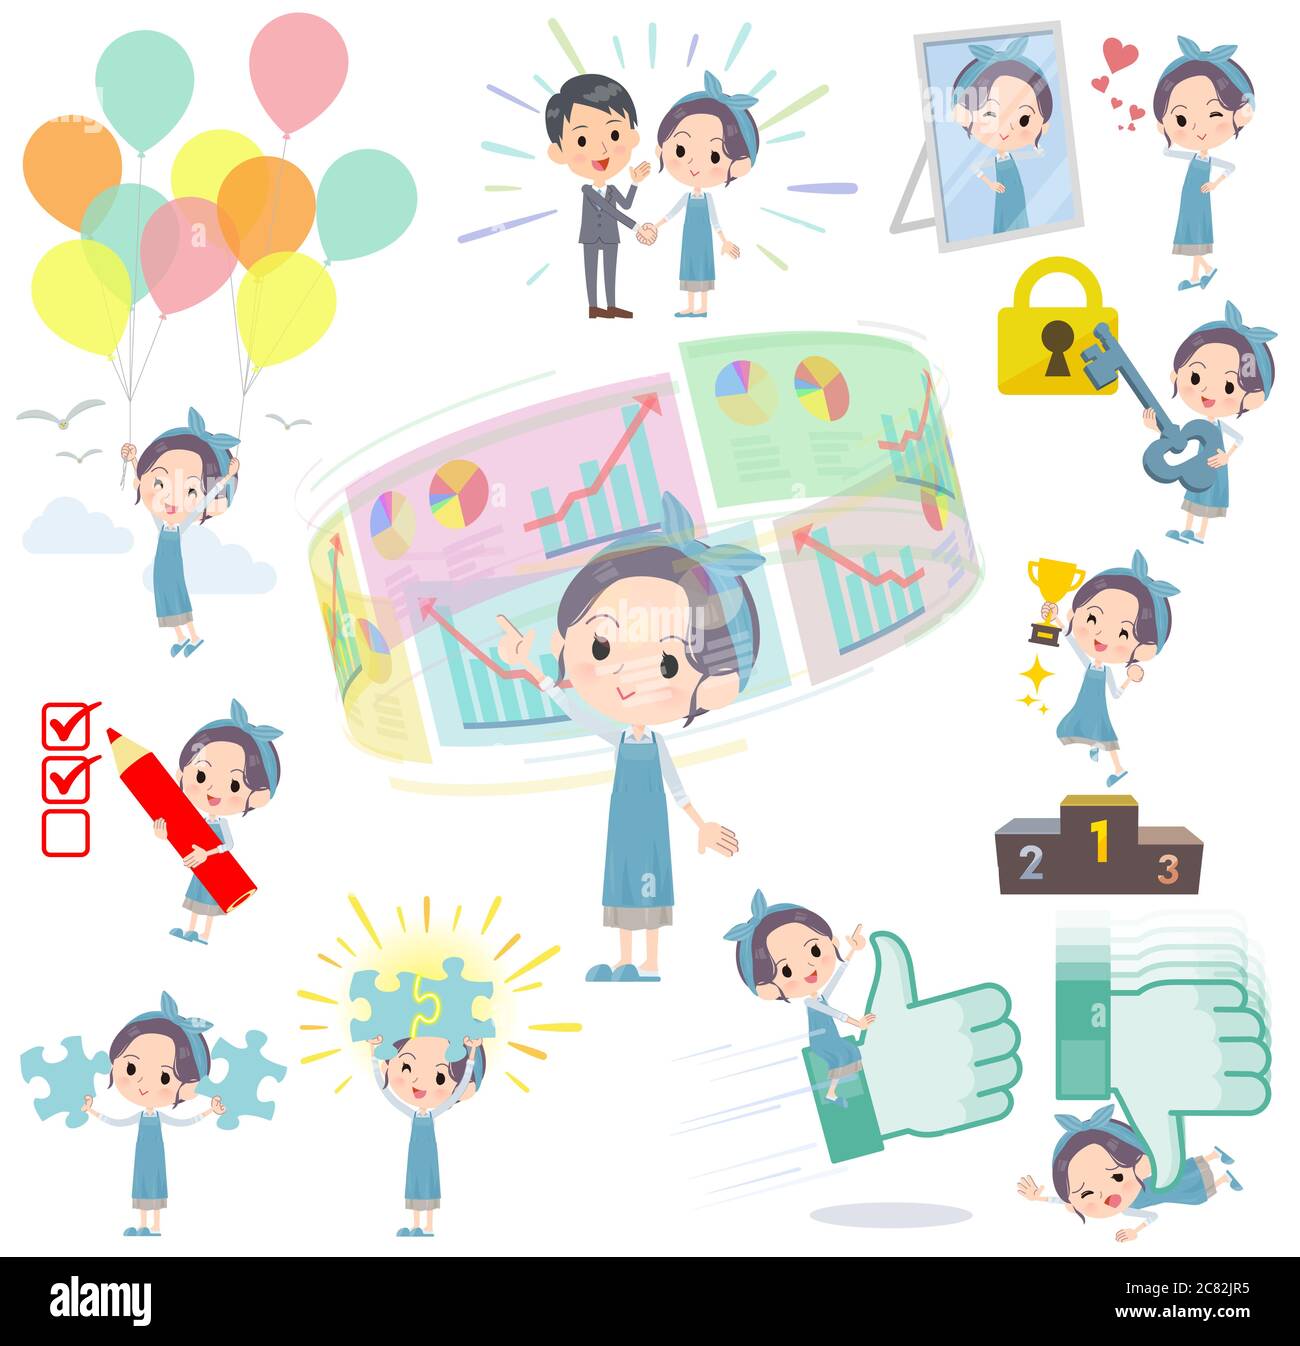 A set of mom on success and positive.There are actions on business and solution as well.It's vector art so it's easy to edit. Stock Vector